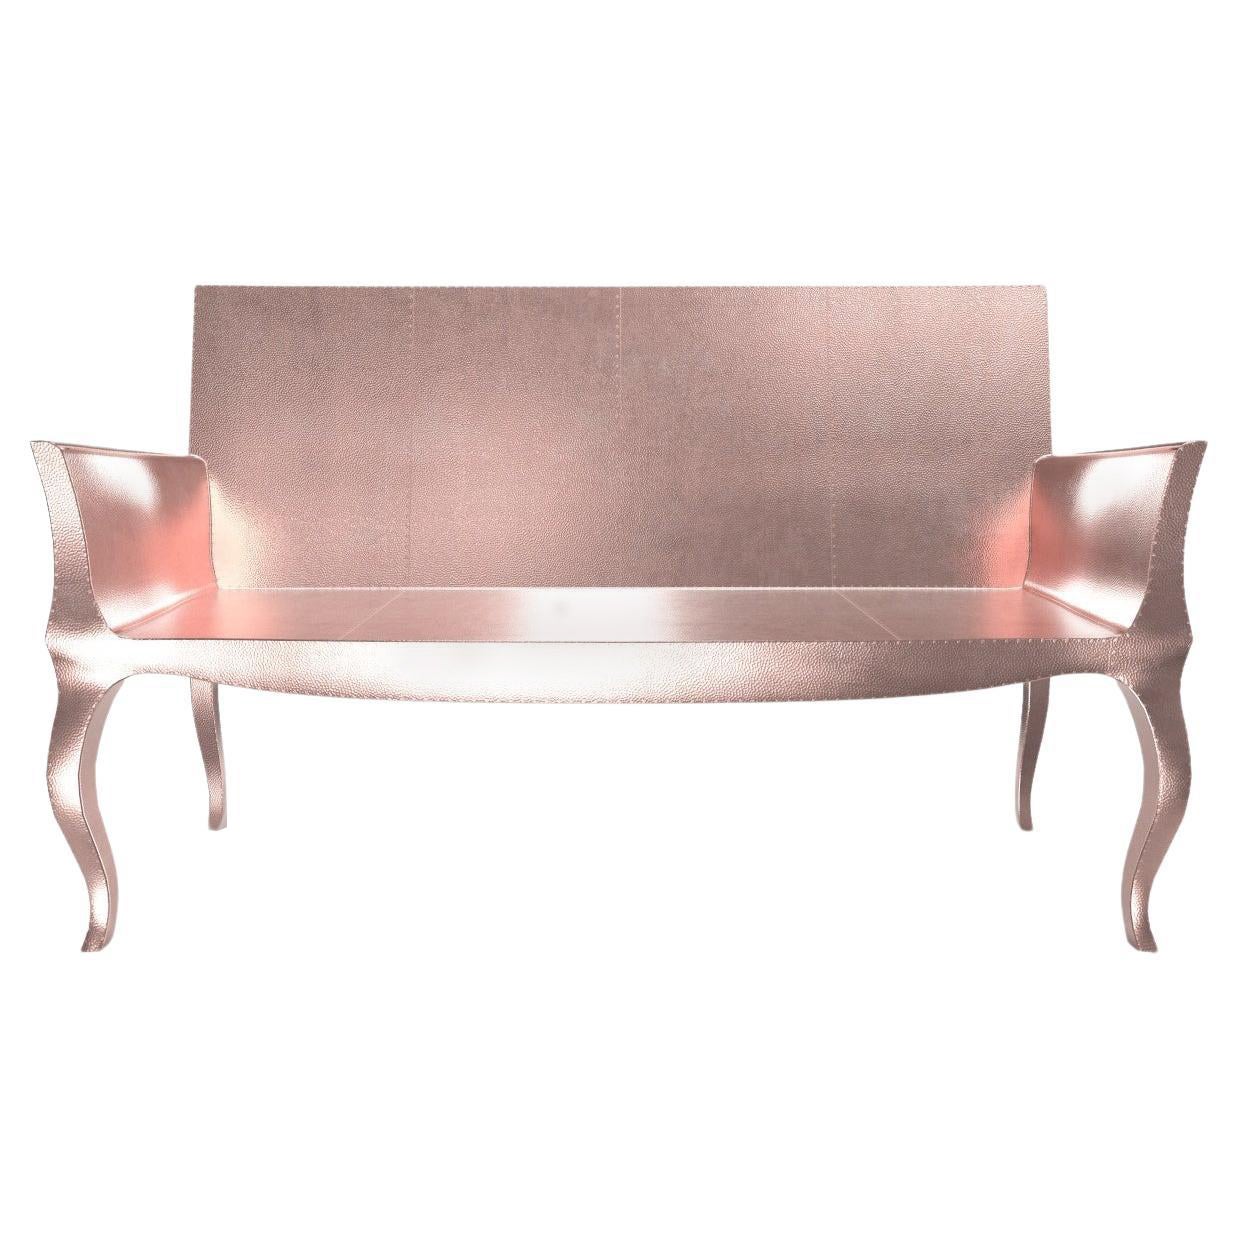 Louise Settee Art Deco Benches in Mid. Hammered Copper by Paul Mathieu For Sale